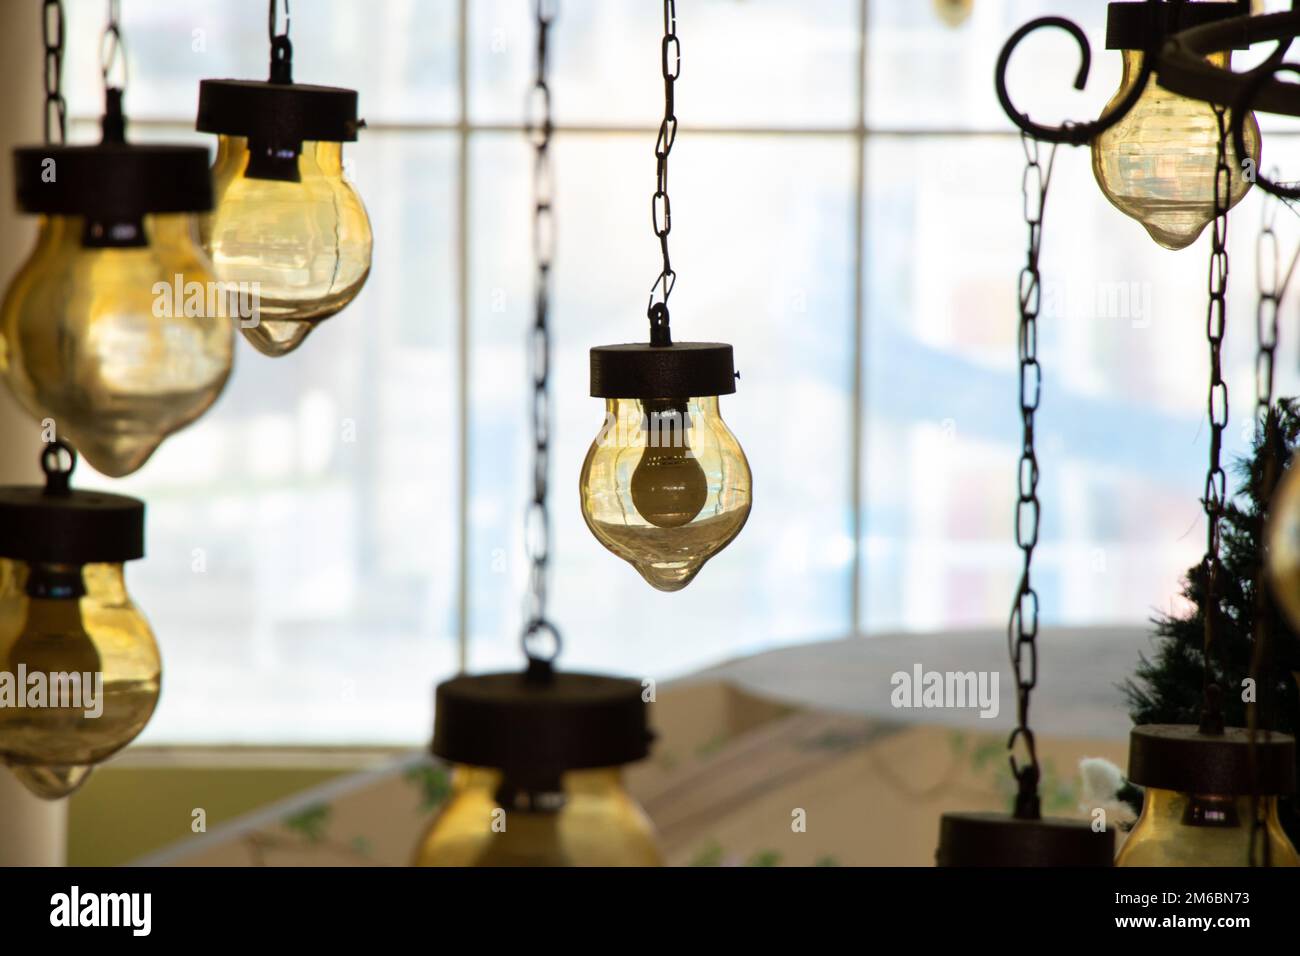 old vintage chandelier hanging on the ceiling of a hotel in egypt close-up Stock Photo